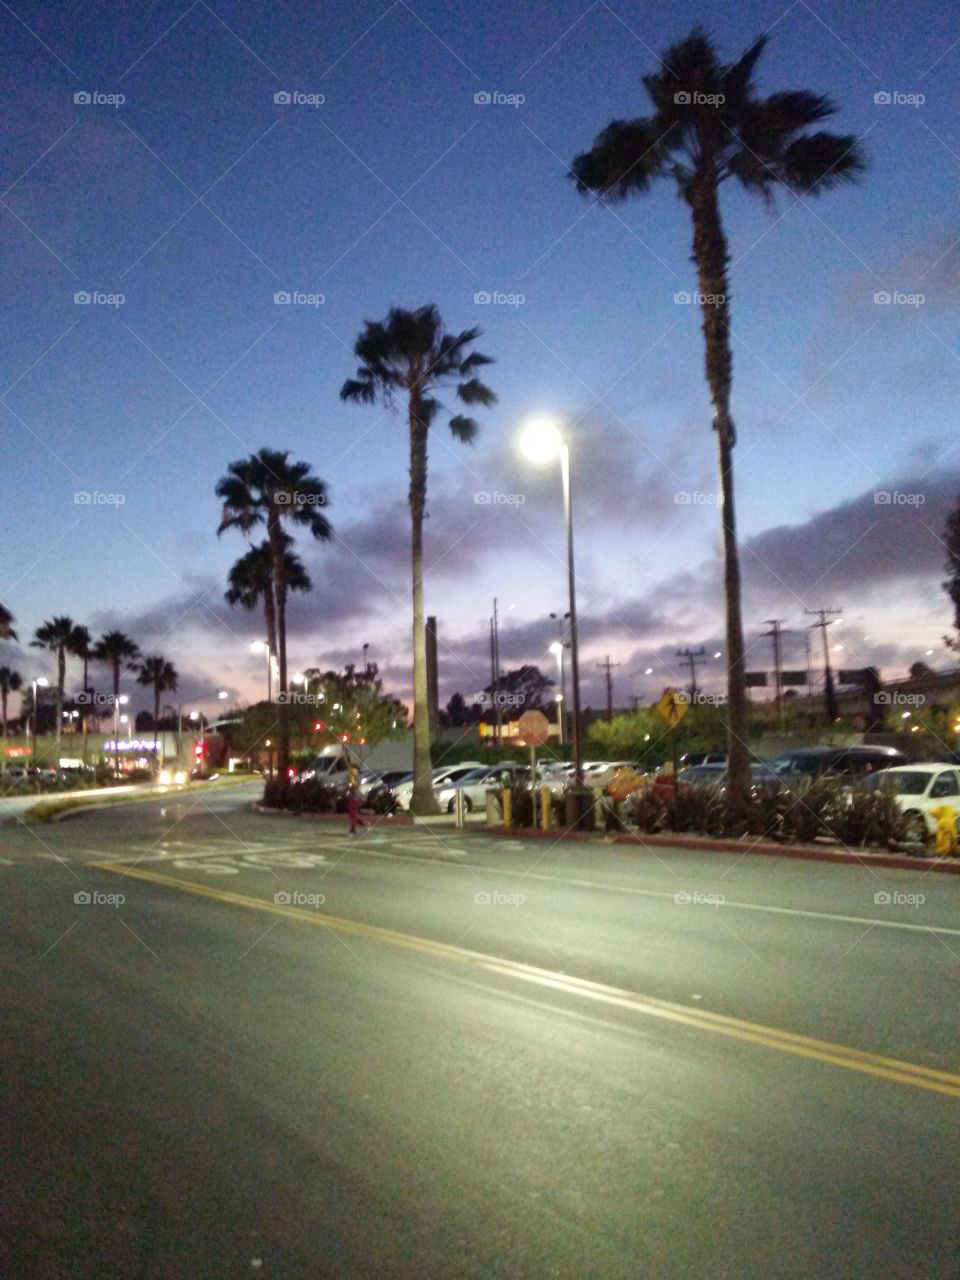 Bright Nights In West LA. Beautiful Sunday evening enjoying shopping with family at Westfield Mall , and we come out to see this beautiful sky.